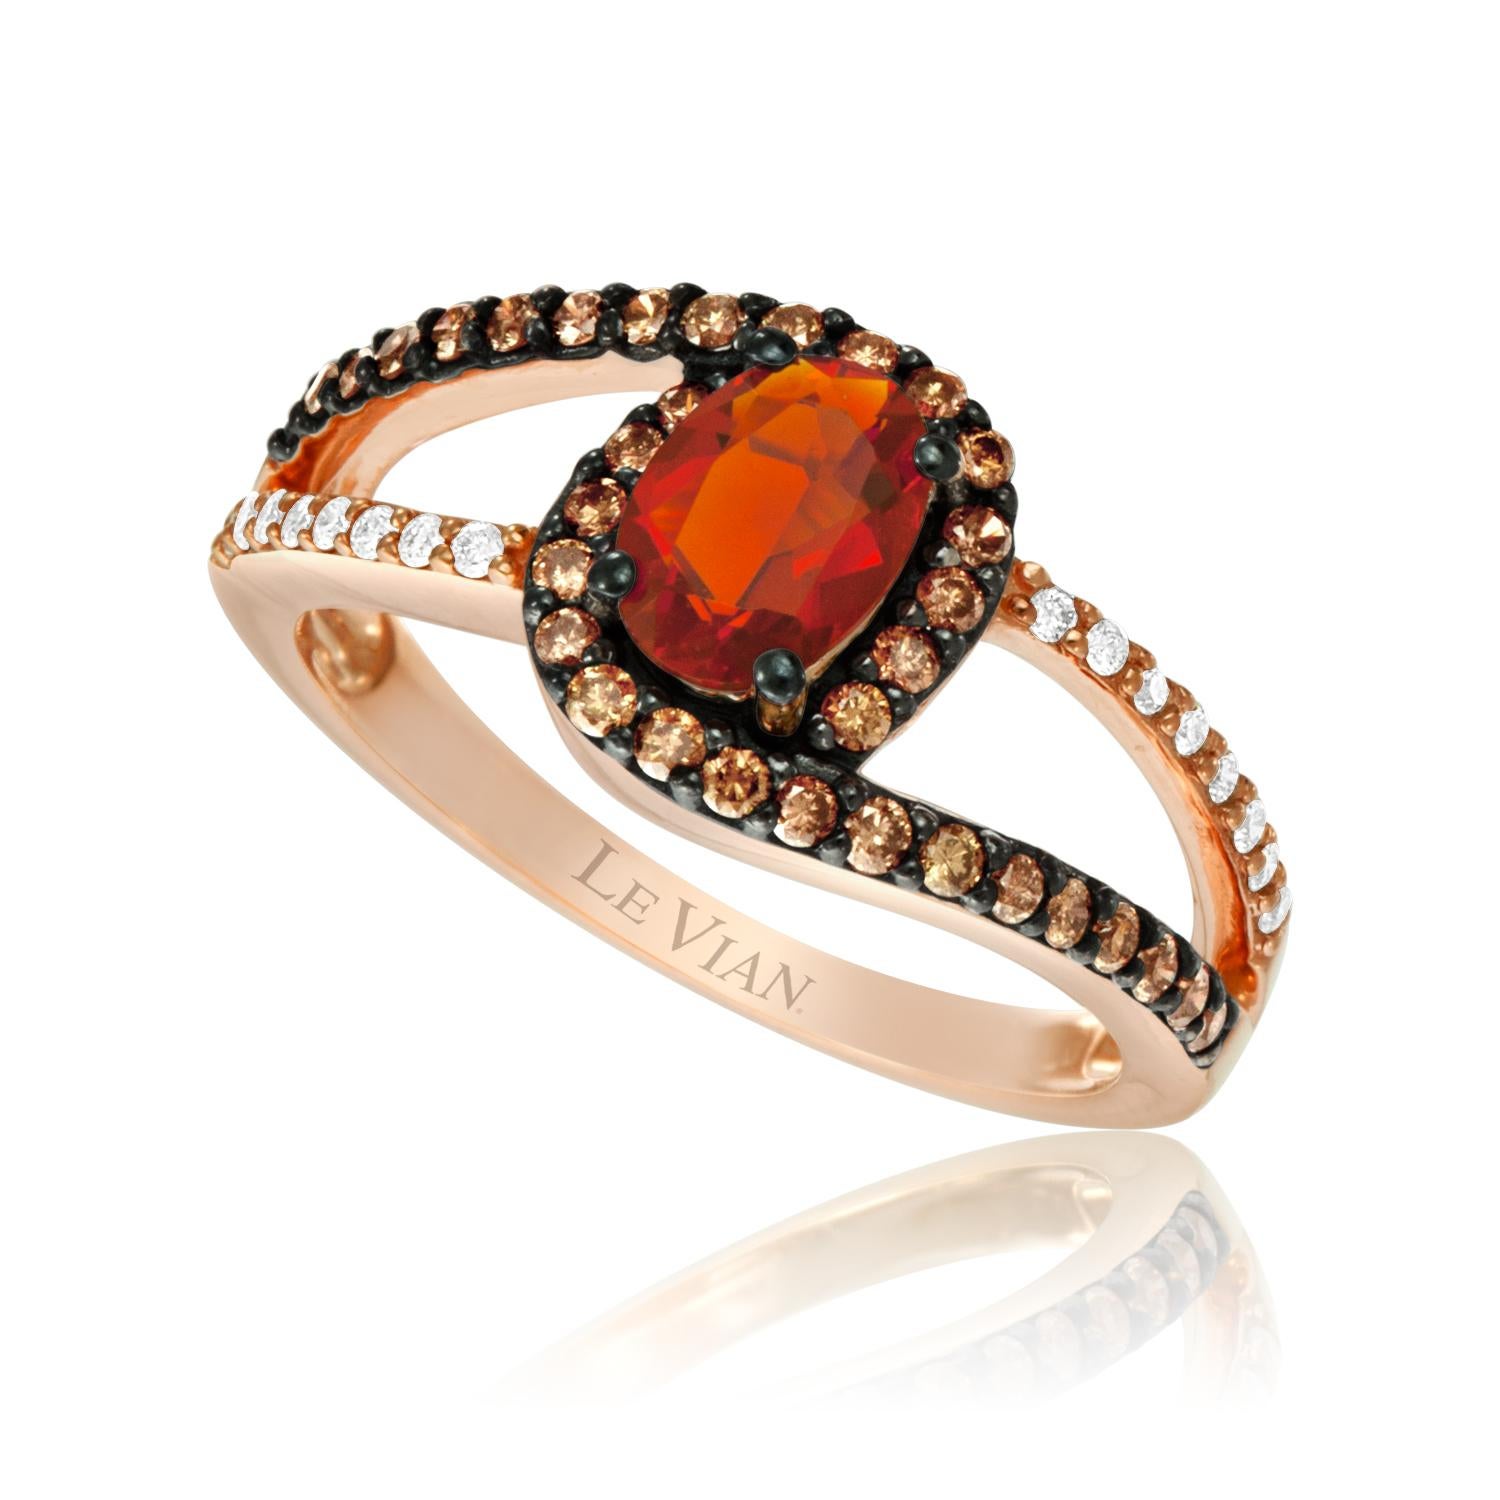 Le Vian Chocolatier® Ring featuring 1/3 cts. Neon Tangerine Fire Opal®, 1/3 cts. Chocolate Diamonds® , 1/15 cts. Vanilla Diamonds®  set in 14K Strawberry Gold®
